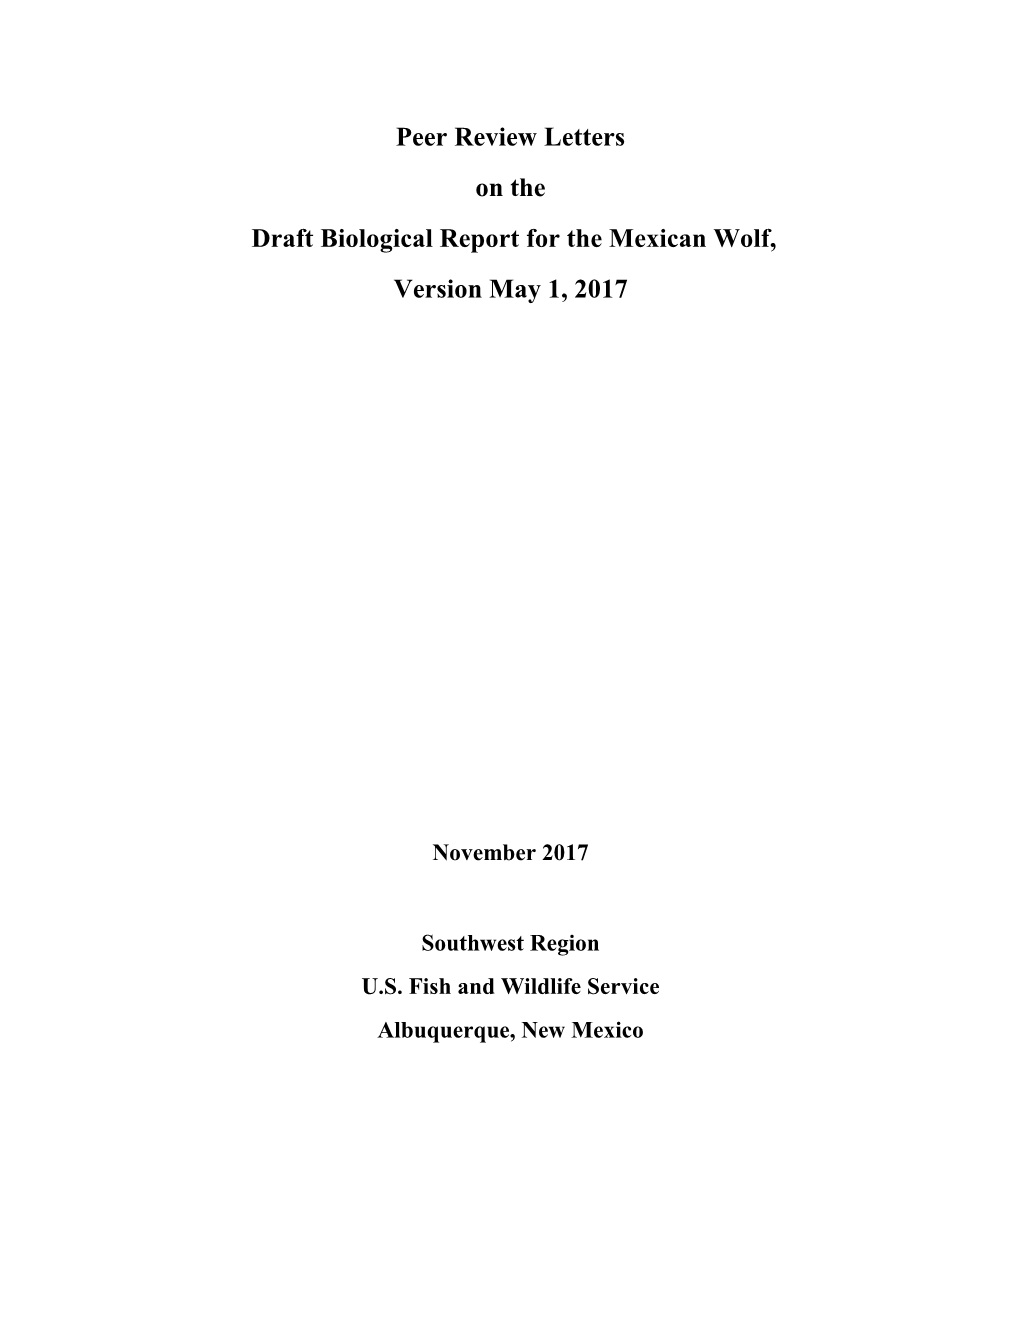 Peer Review Letters on the Draft Biological Report for the Mexican Wolf, Version May 1, 2017